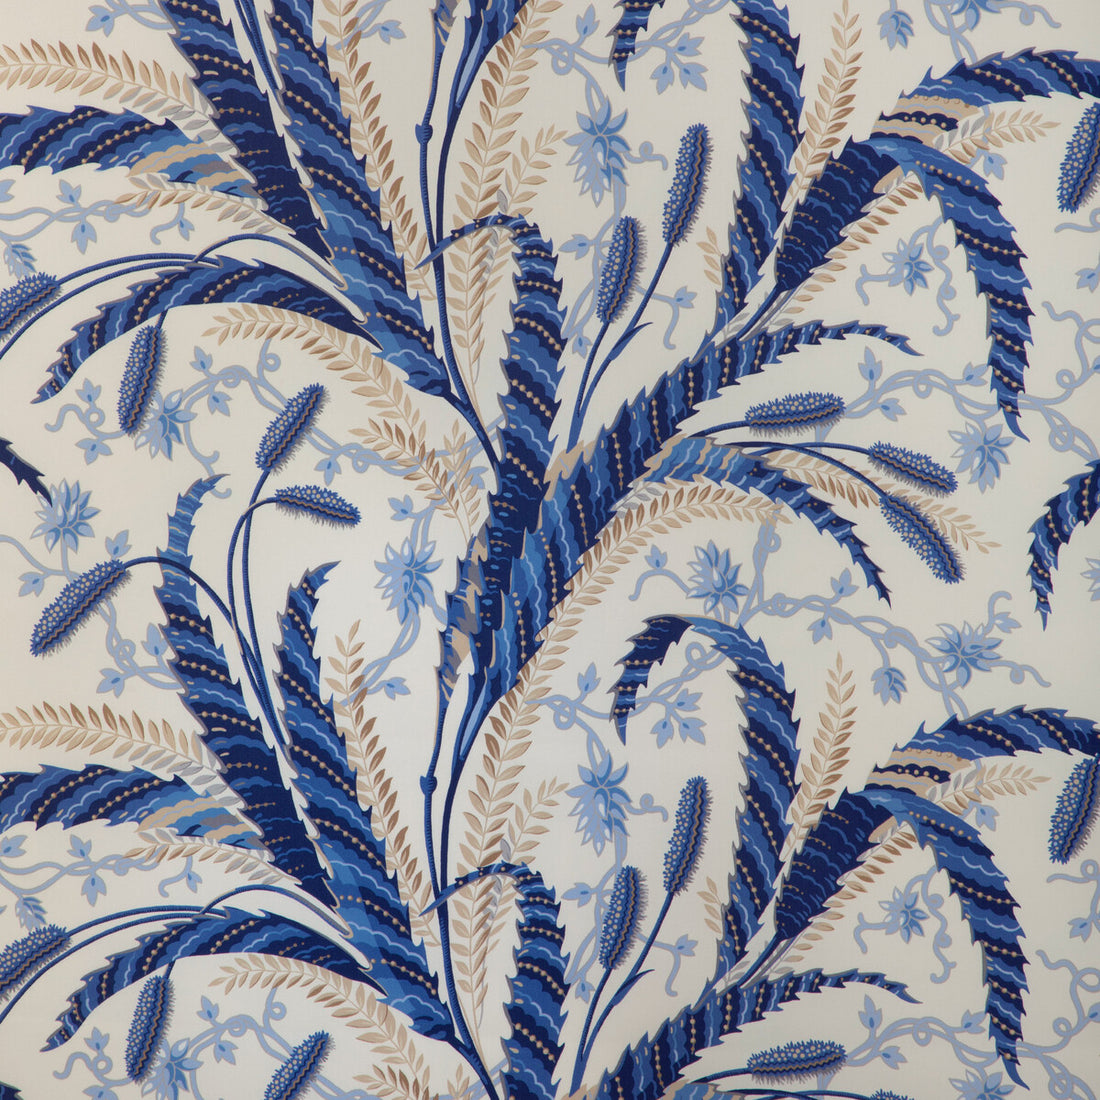 Vernay Print fabric in blue color - pattern 8023101.5.0 - by Brunschwig &amp; Fils in the Cadenet collection